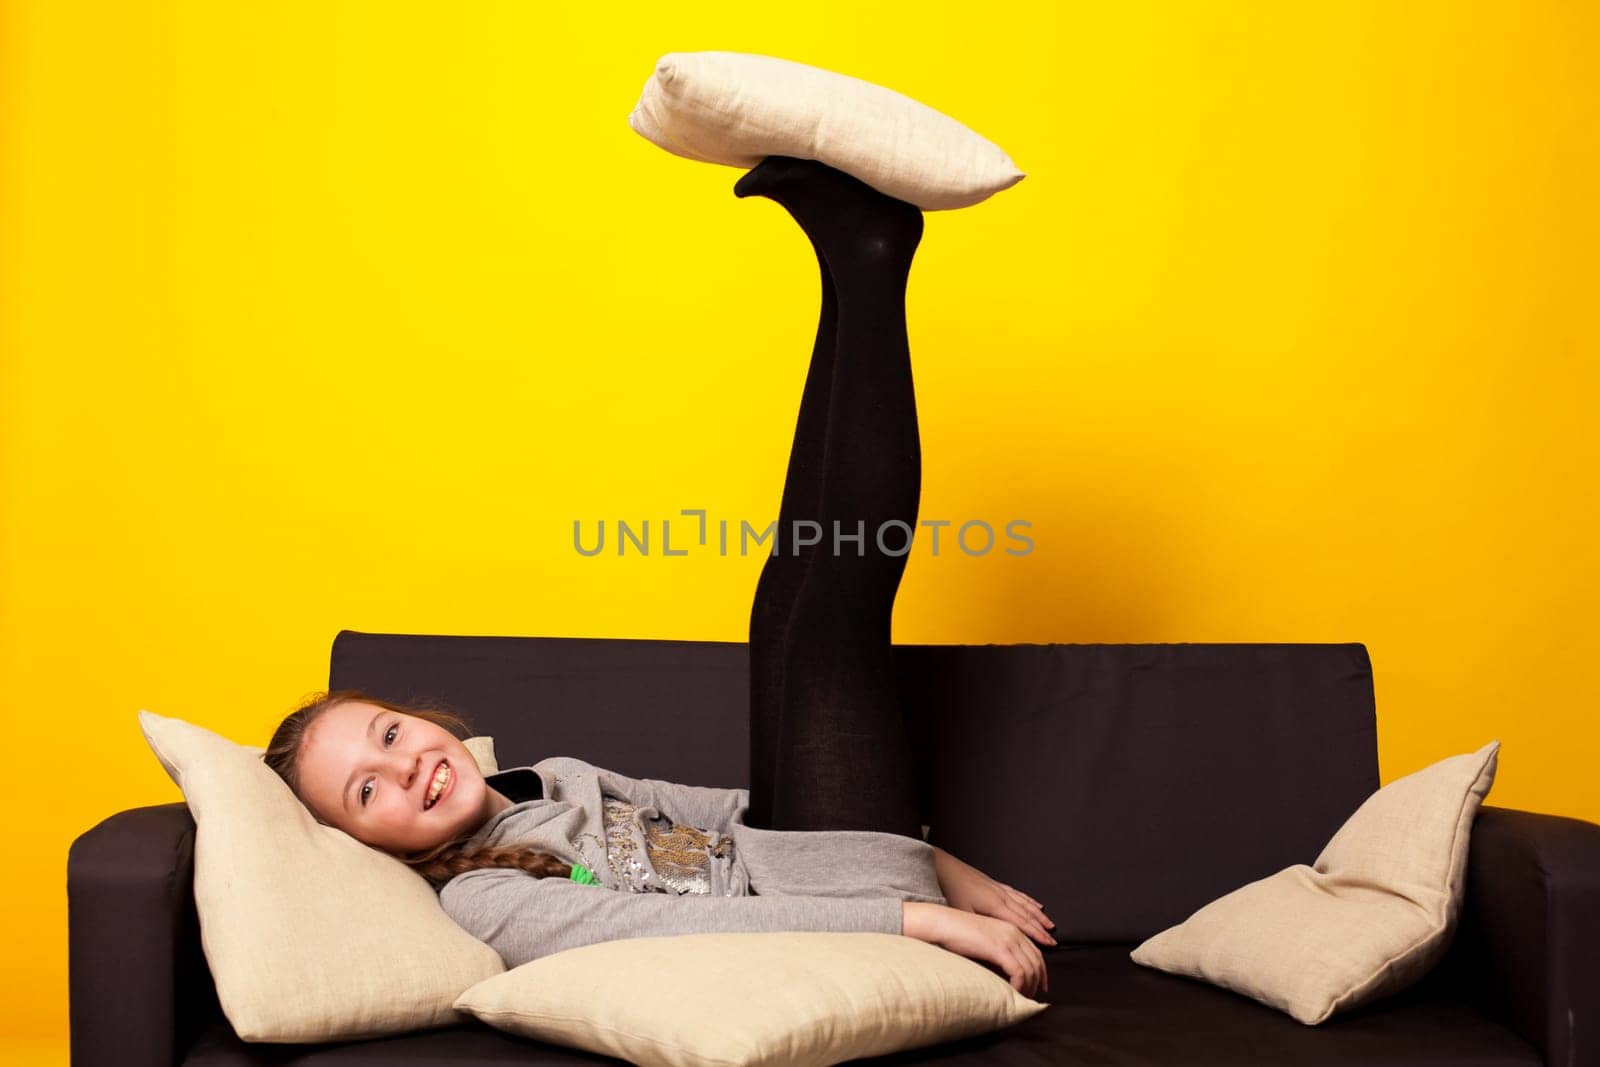 Cheerful girl lying on the couch with pillows by Simakov